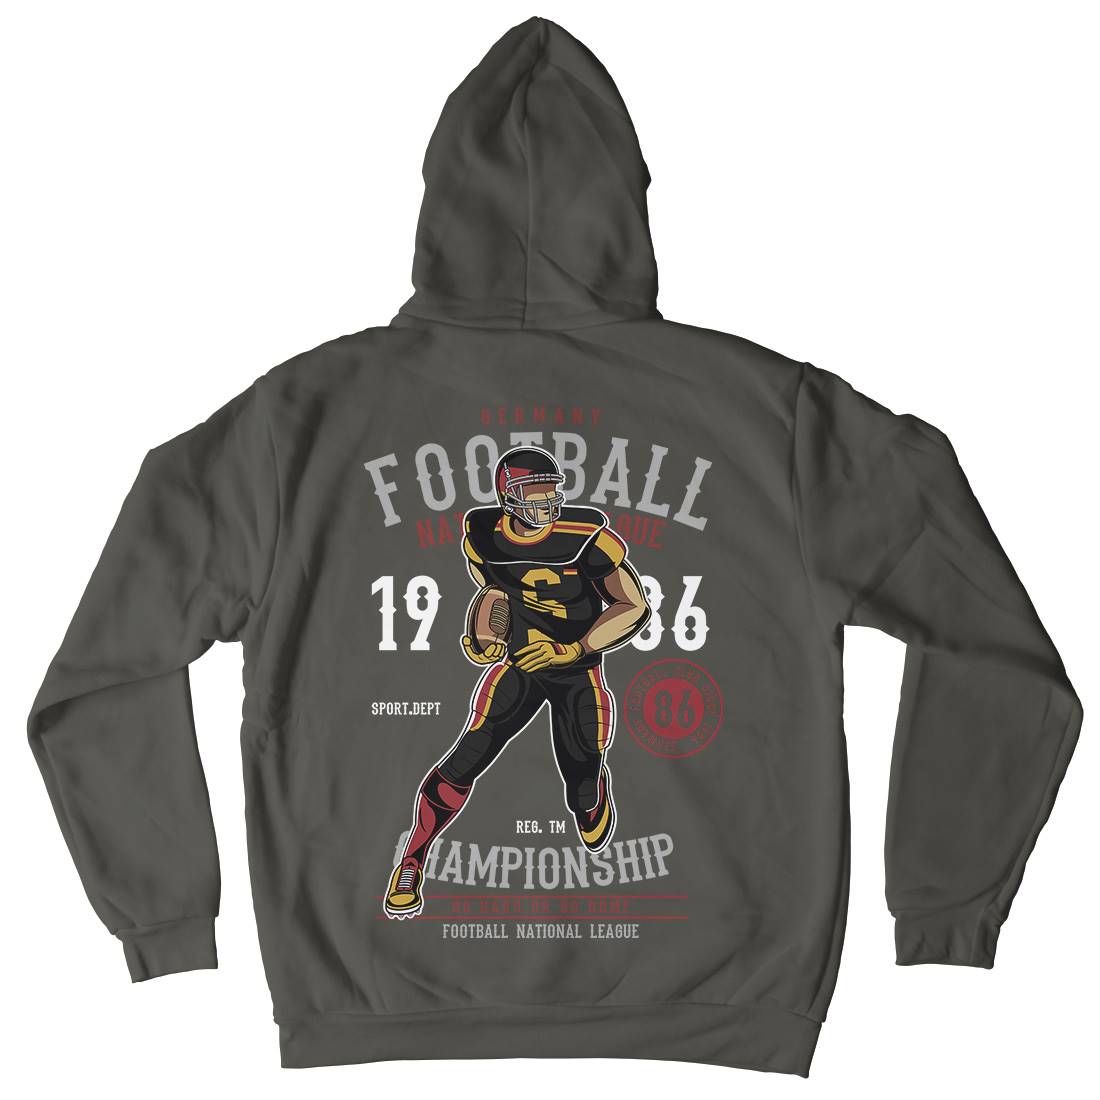 Germany Football Player Mens Hoodie With Pocket Sport C364